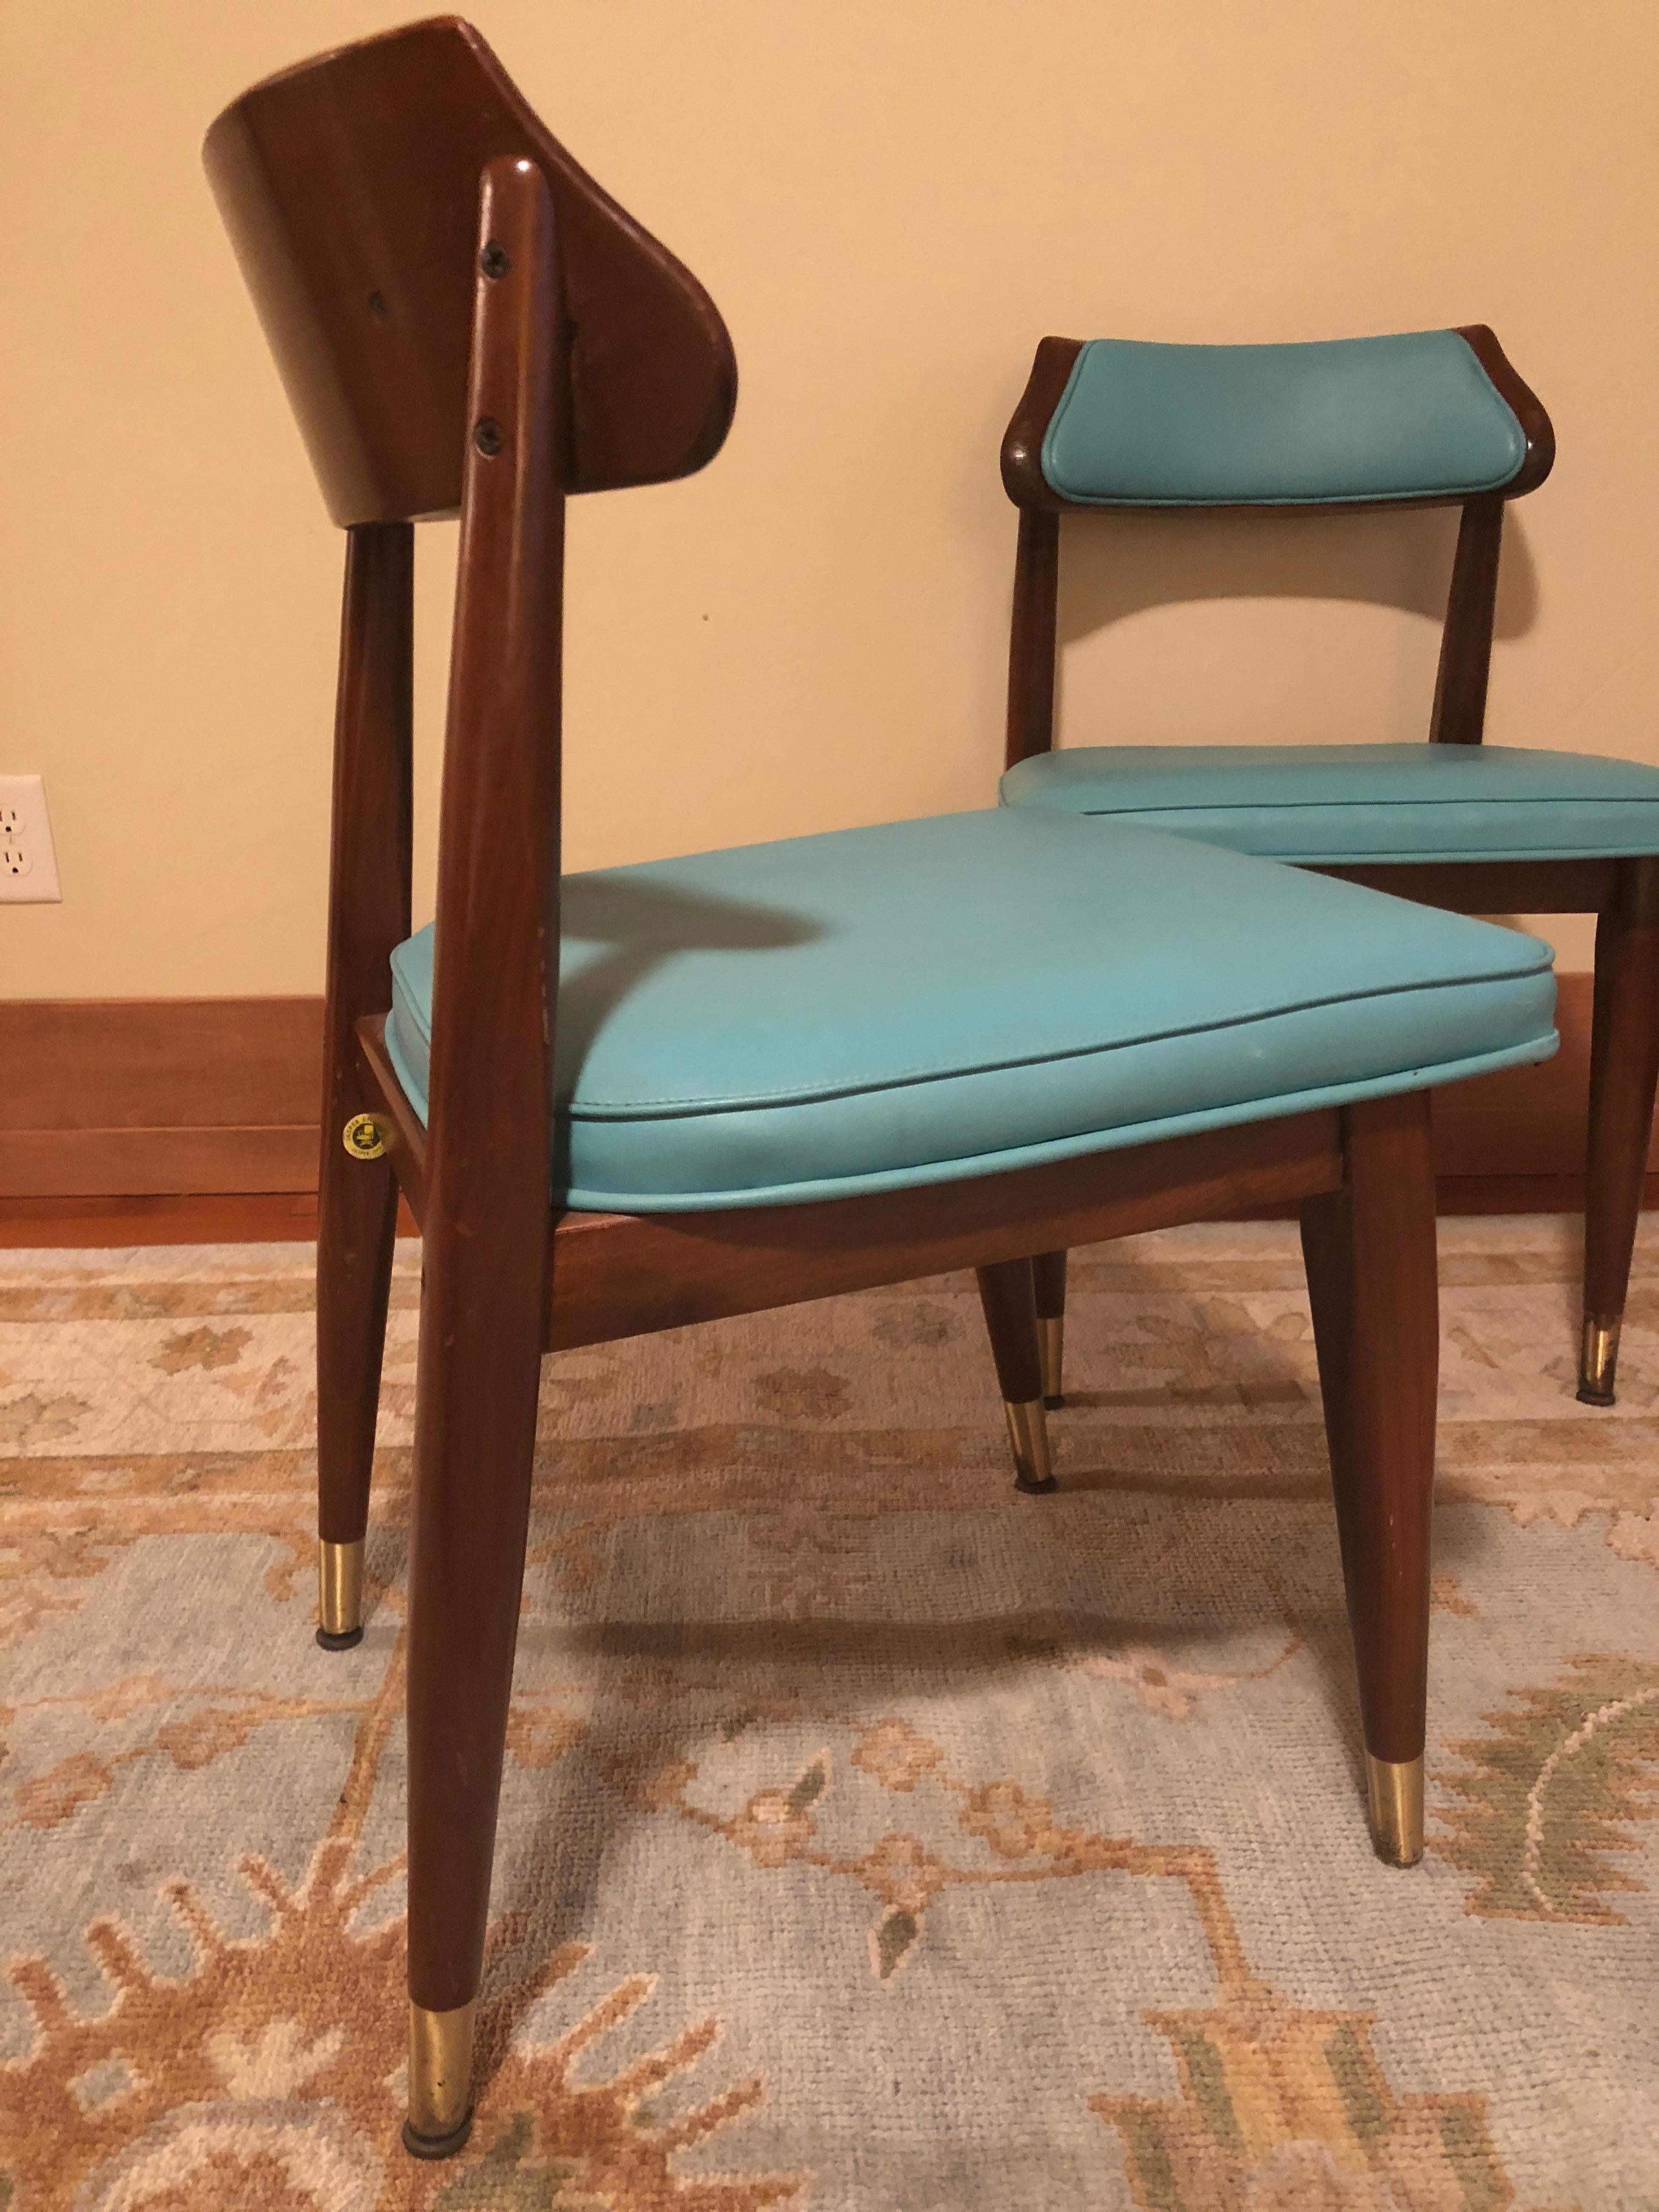 In the manner of the Danish chairs of the day, Jasper Chair Co. was an American maker of midcentury desk and office furniture with incredible lines. The turquoise blue sea foam color is stunning and in mint condition as are the back rests. Minimal